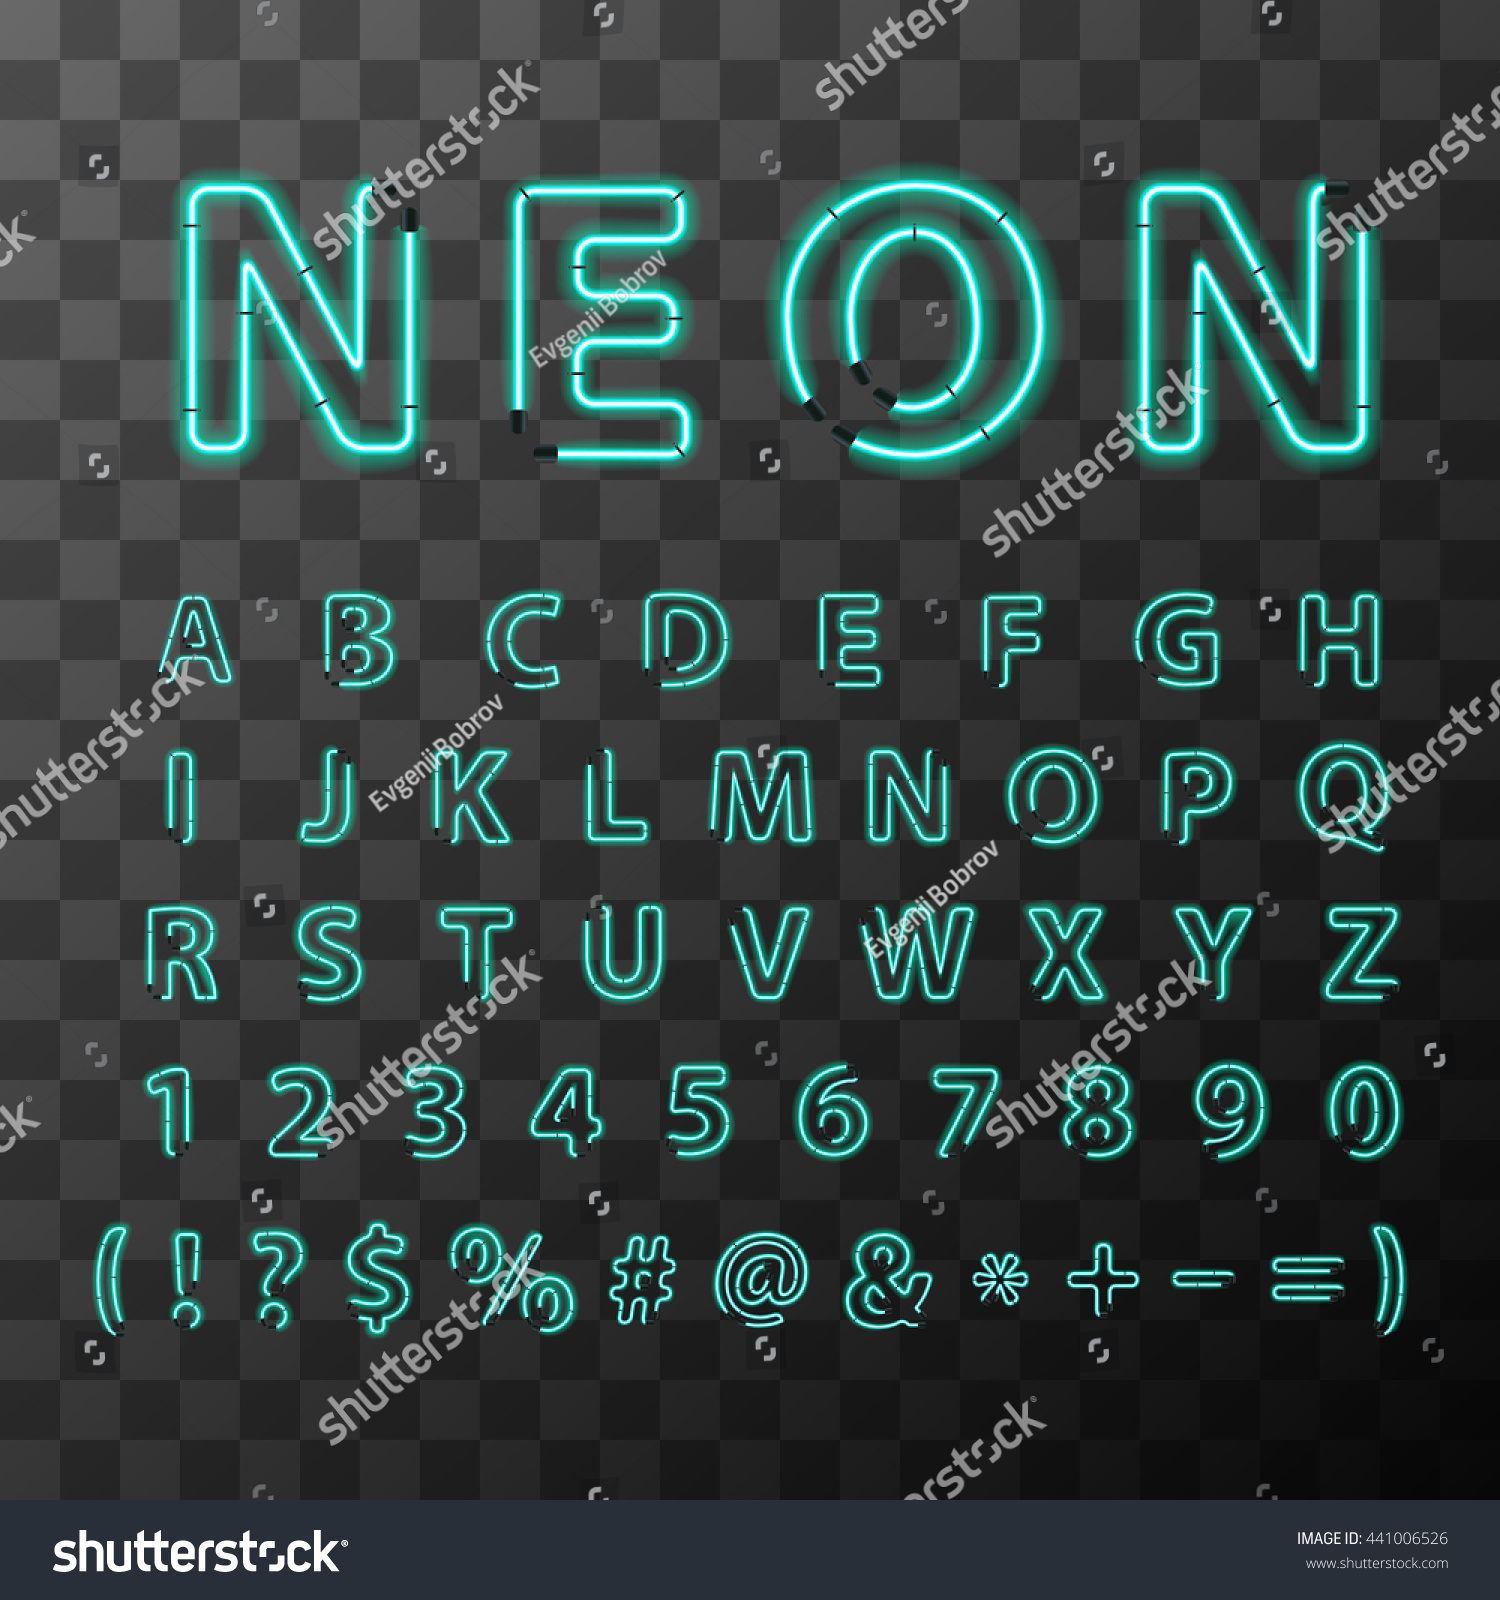 Bright Realistic Neon Letters Full Latin Stock Vector (Royalty Free ...